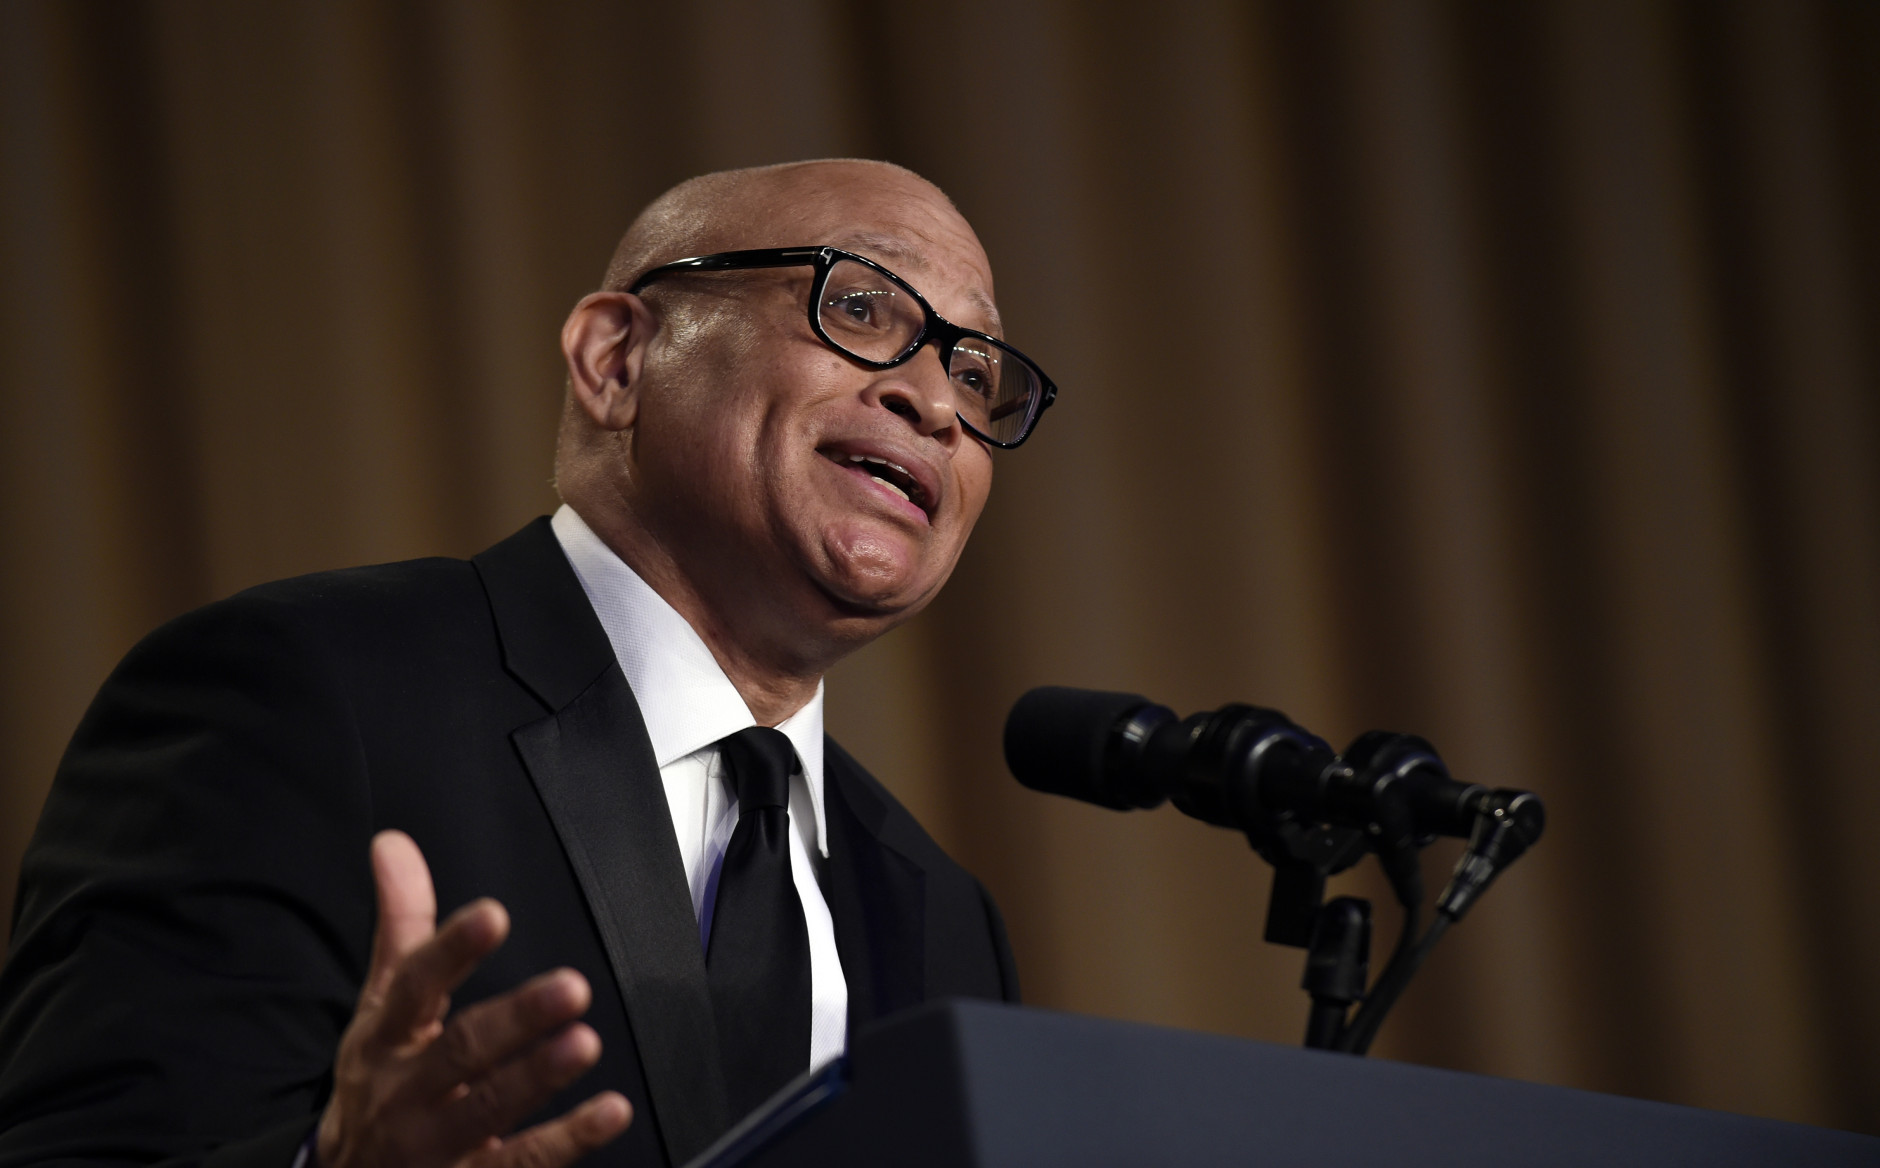 Larry Wilmore, the guest host from Comedy Central, speaks at the annual White House Correspondents' Association dinner at the Washington Hilton in Washington, Saturday, April 30, 2016. (AP Photo/Susan Walsh)